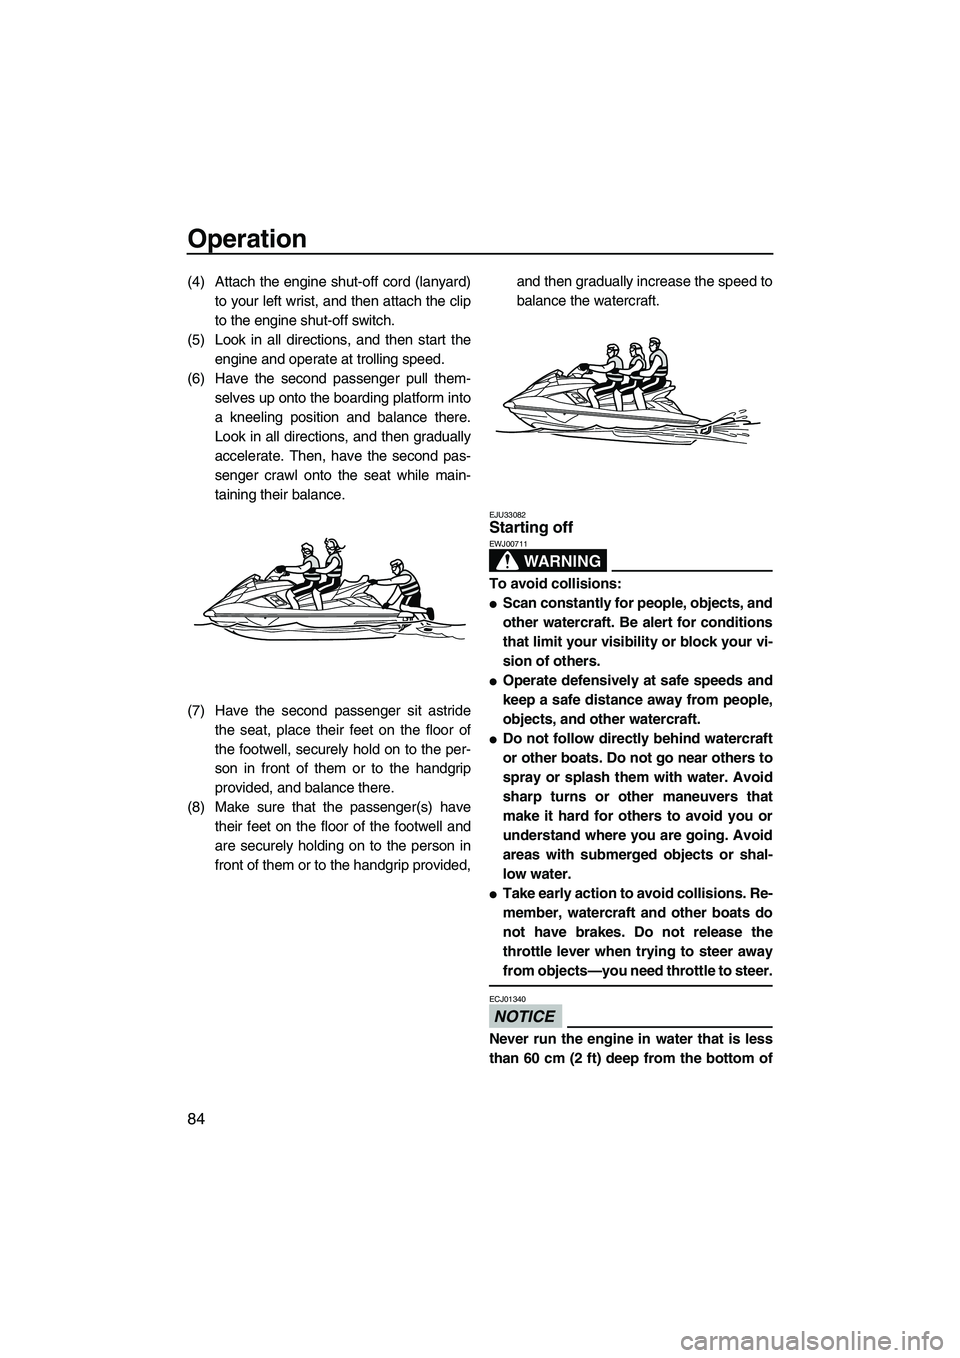 YAMAHA FX HO CRUISER 2013  Owners Manual Operation
84
(4) Attach the engine shut-off cord (lanyard)to your left wrist, and then attach the clip
to the engine shut-off switch.
(5) Look in all directions, and then start the engine and operate 